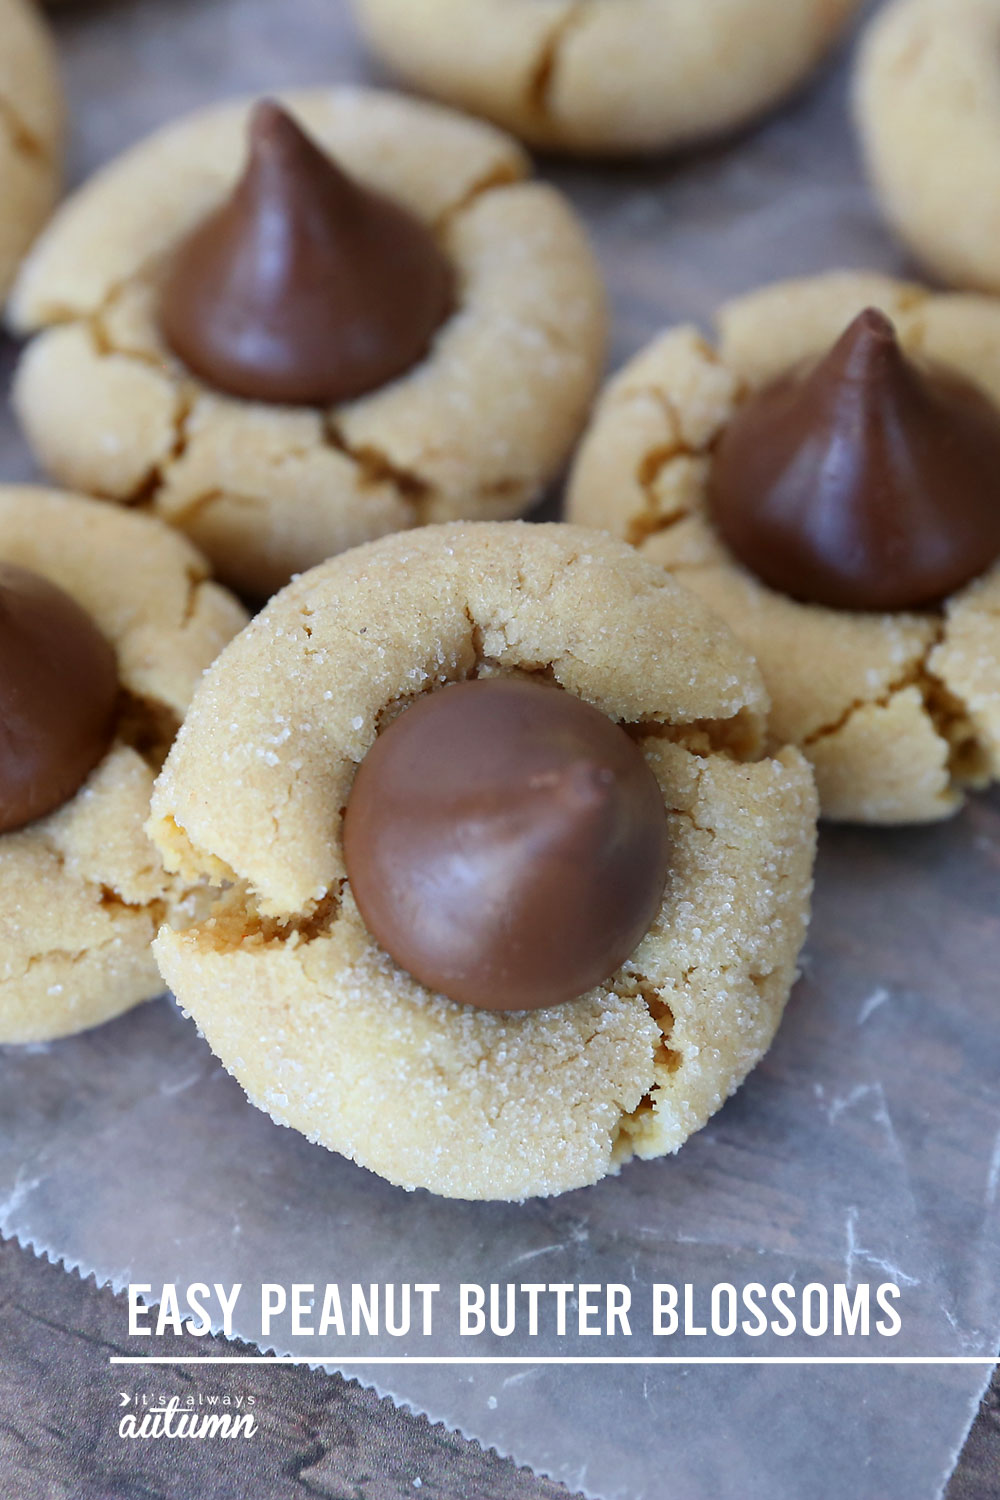 Peanut butter blossoms: peanut butter cookies with a Hershey kiss pressed in the middle